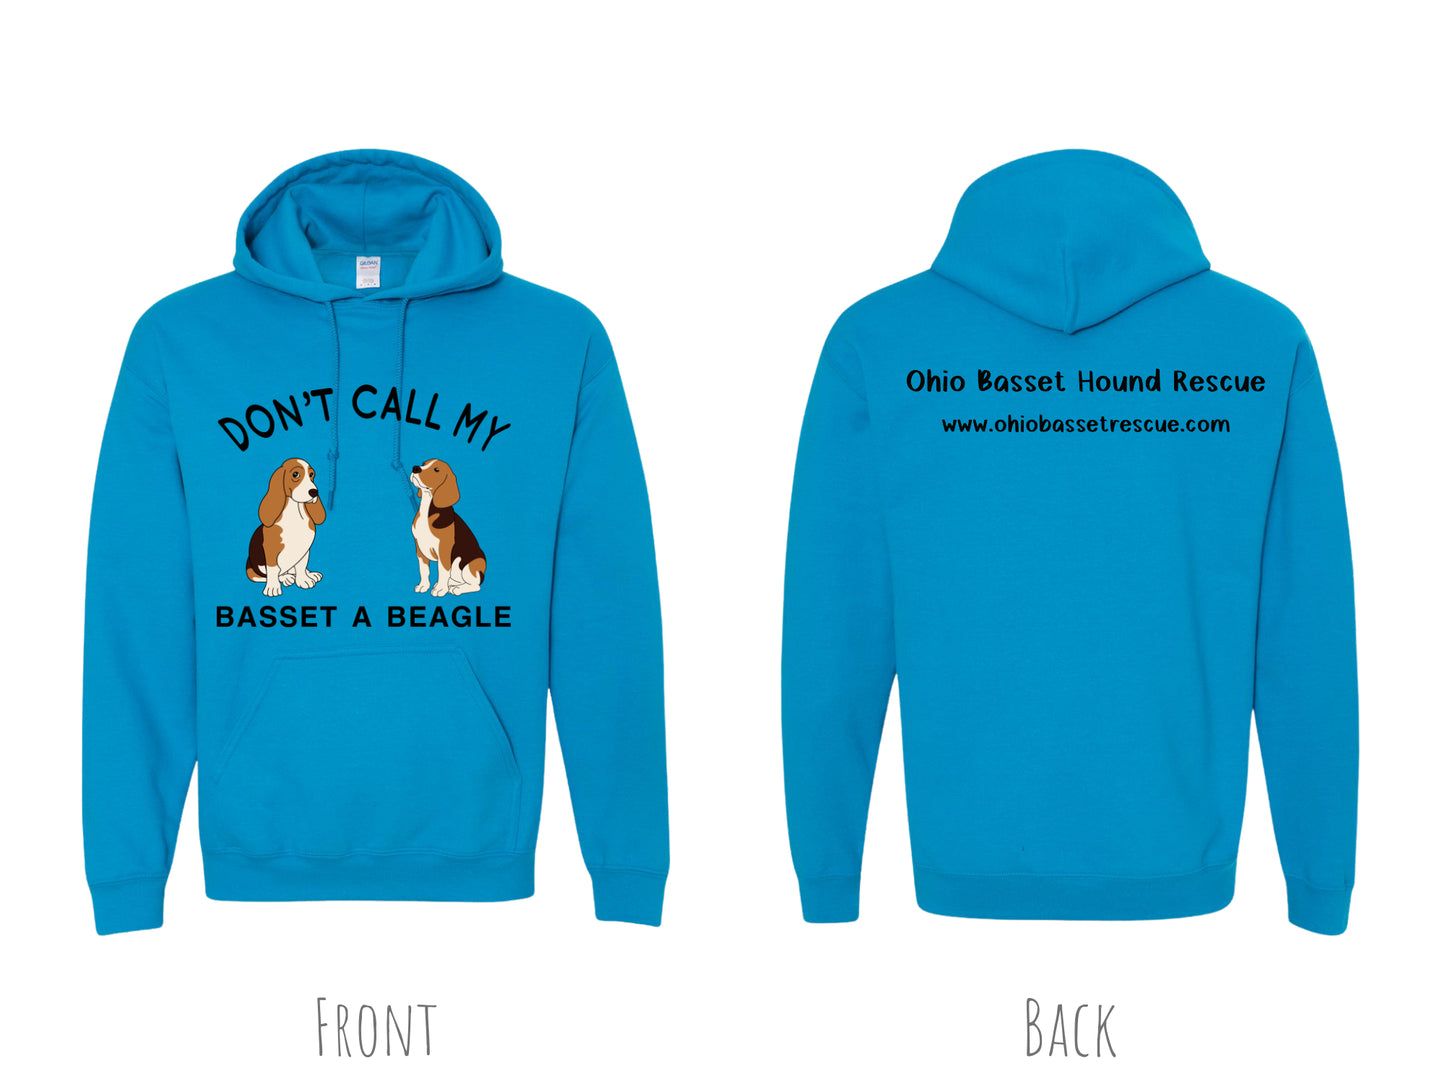 Don't call my Basset a Beagle Hoodie *7 COLORS*